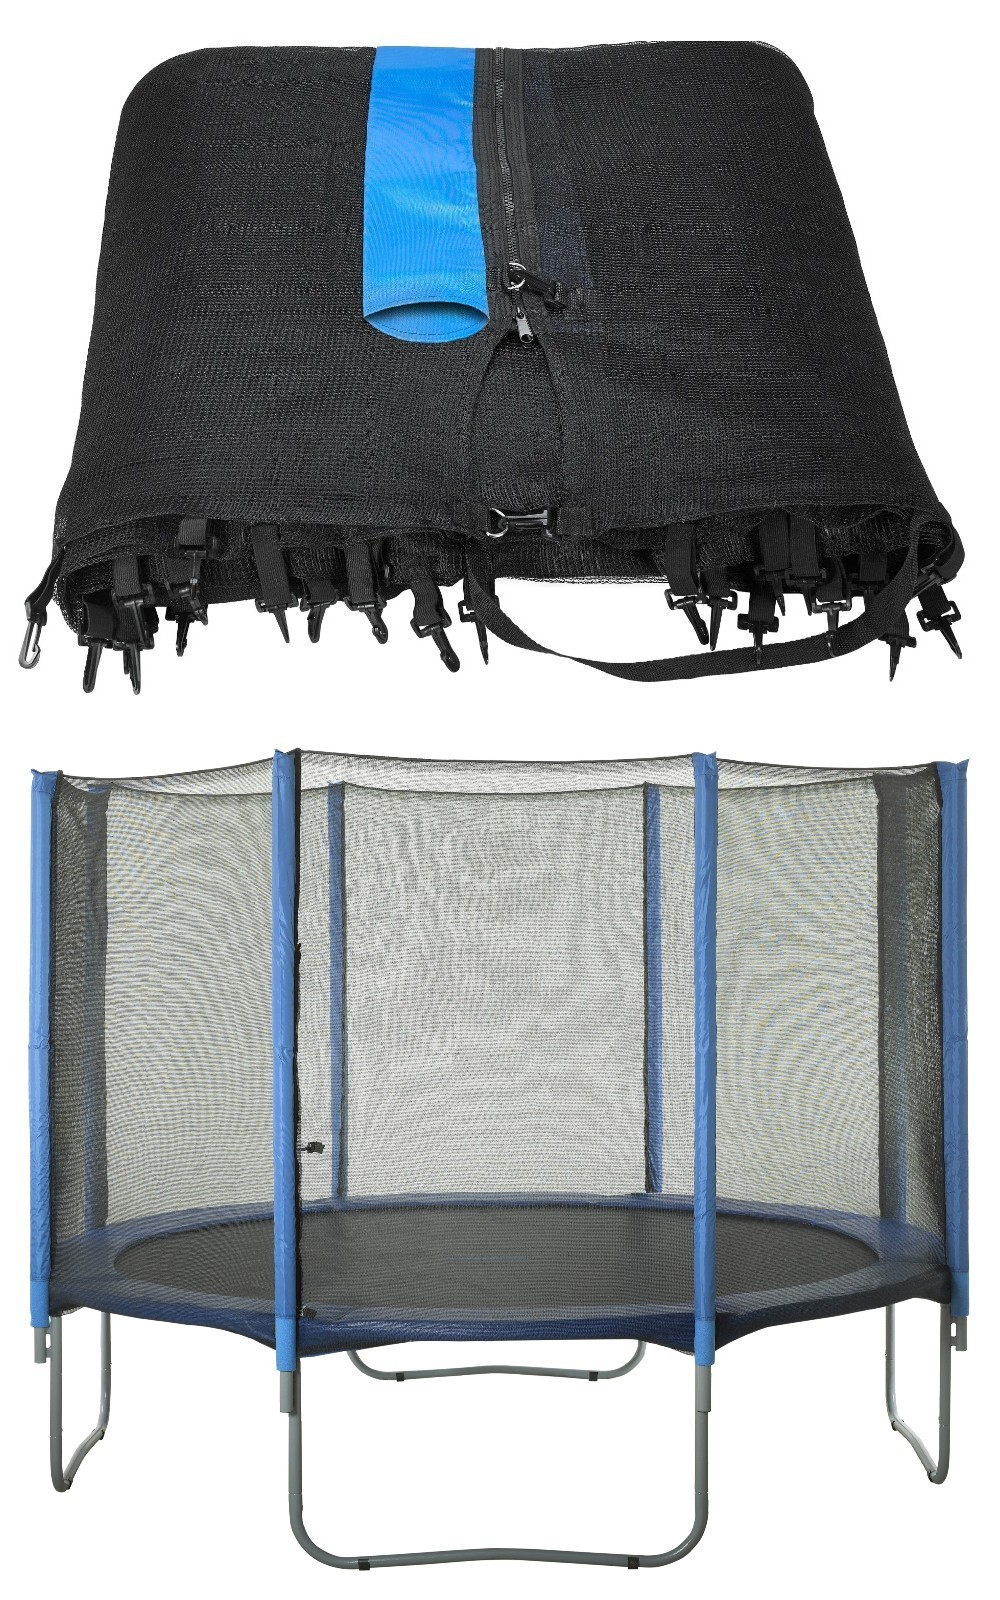 Trampoline Replacement Enclosure Safety Net, fits for 15 FT. Round Frames using 8 Straight Poles - Net Only